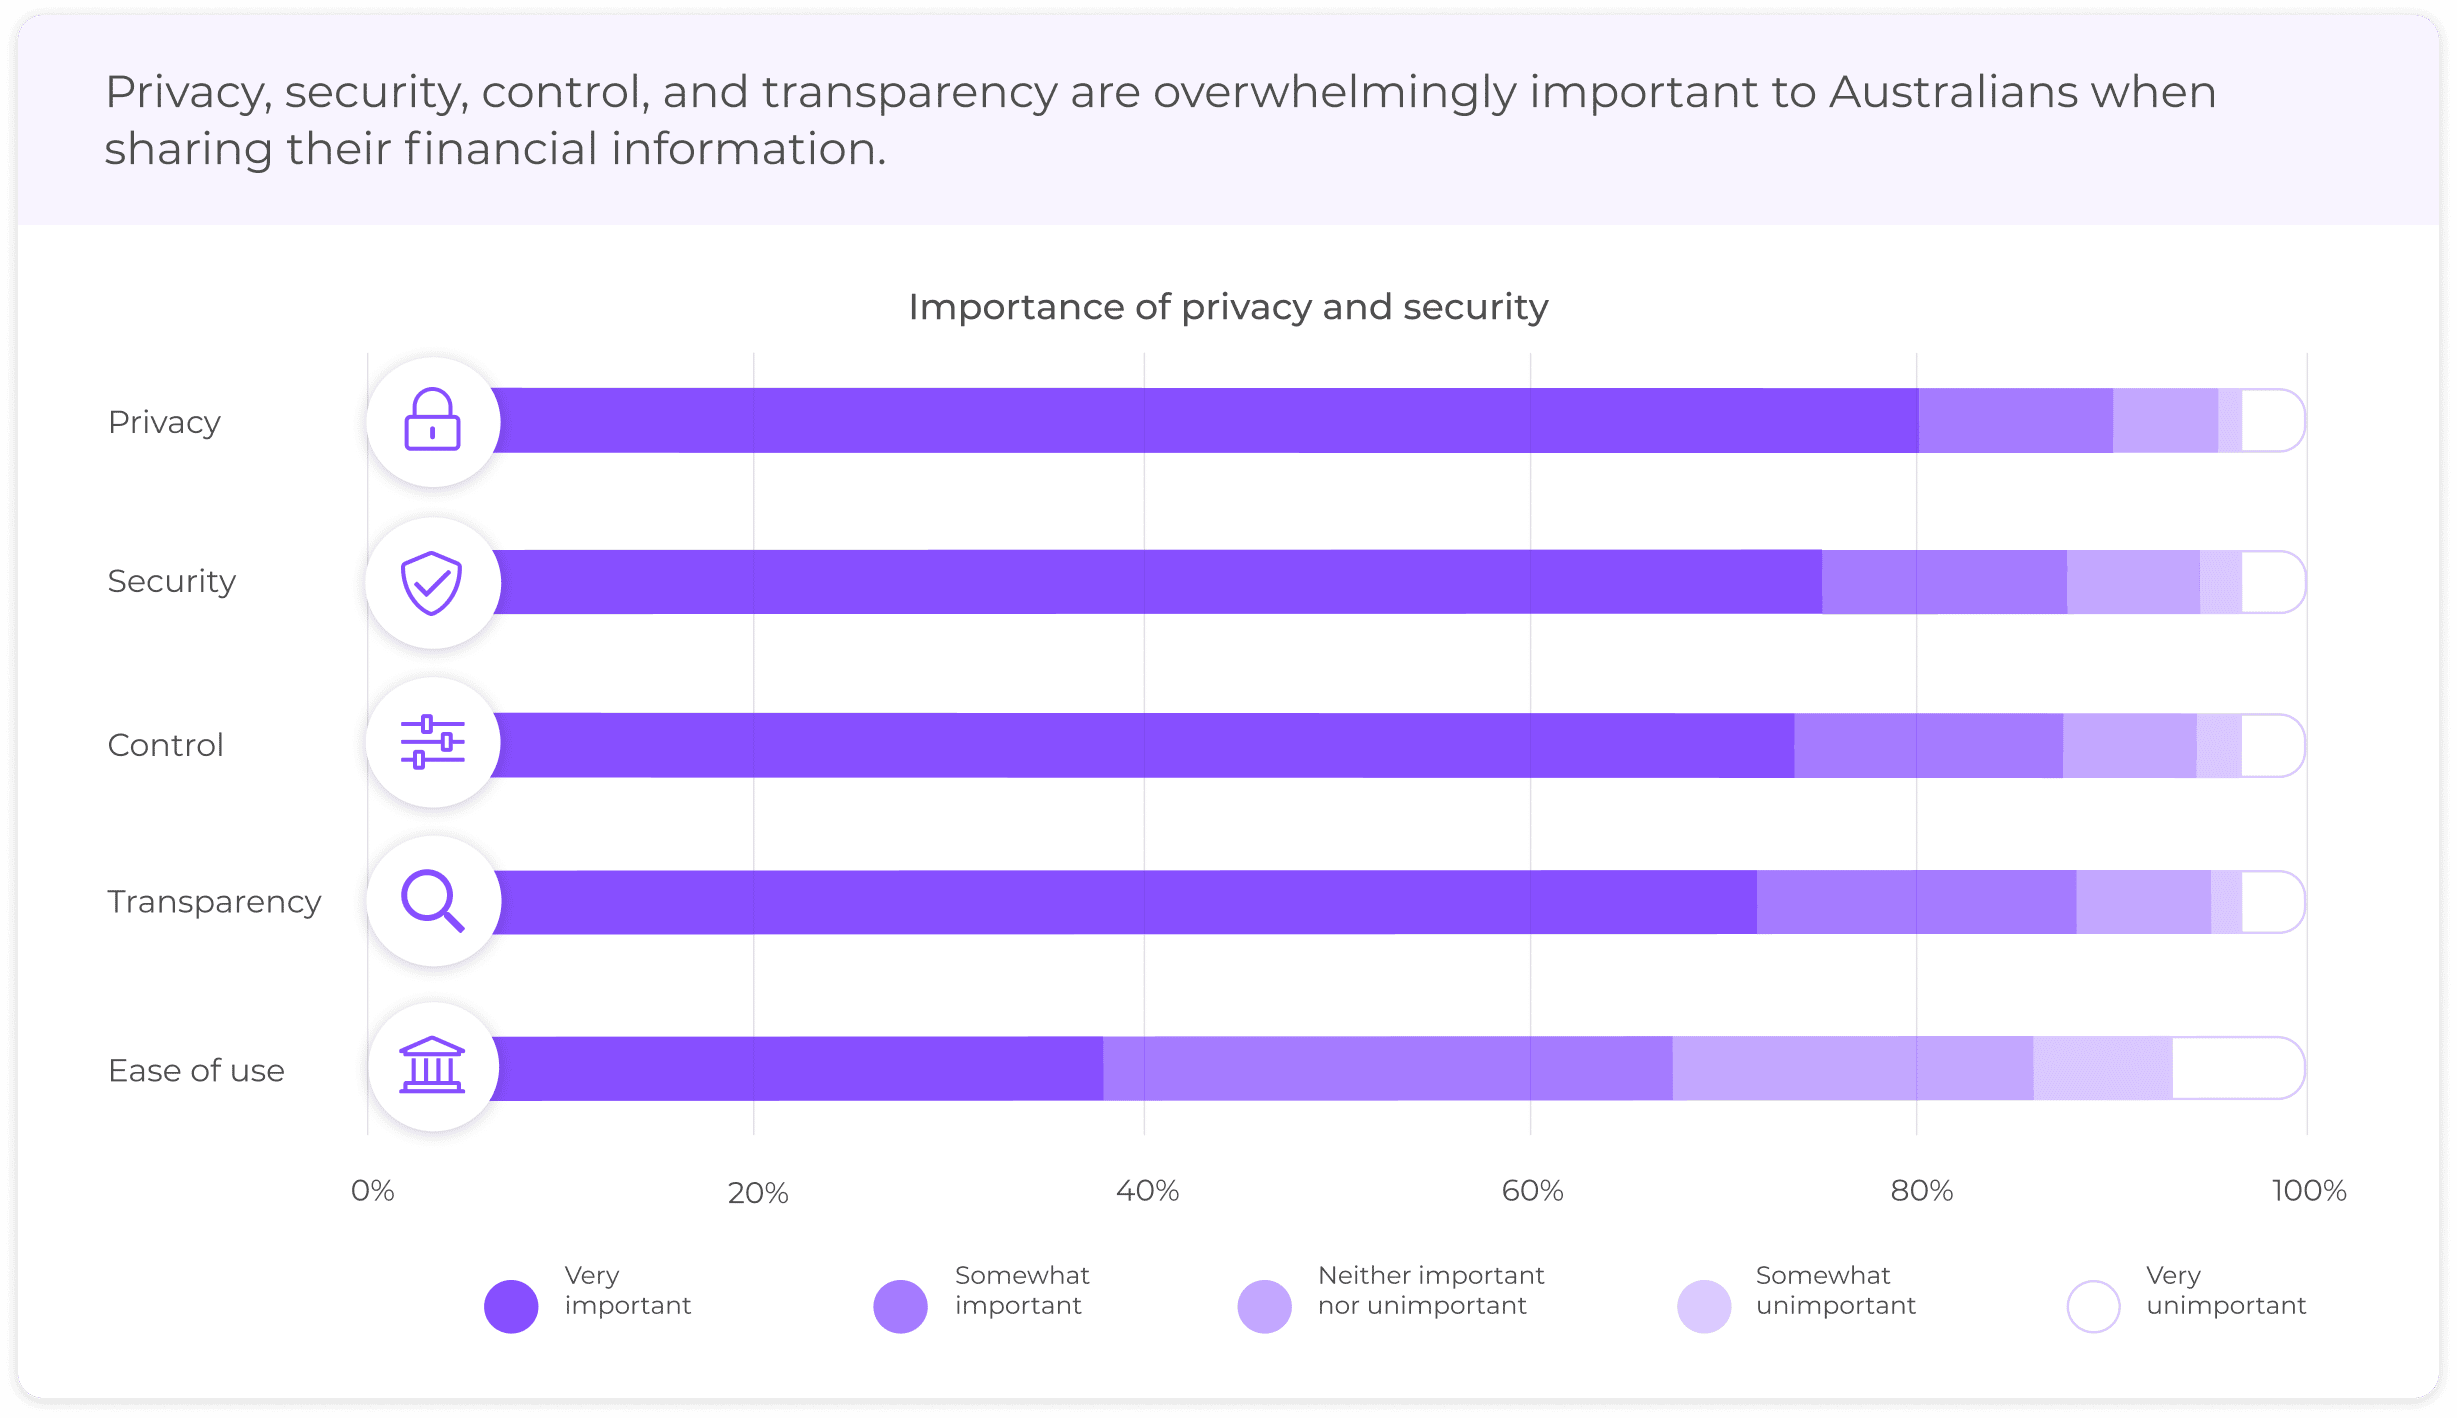 Open Banking consumer perspective - Privacy, security, control, and transparency are important to Australians when sharing their financial information